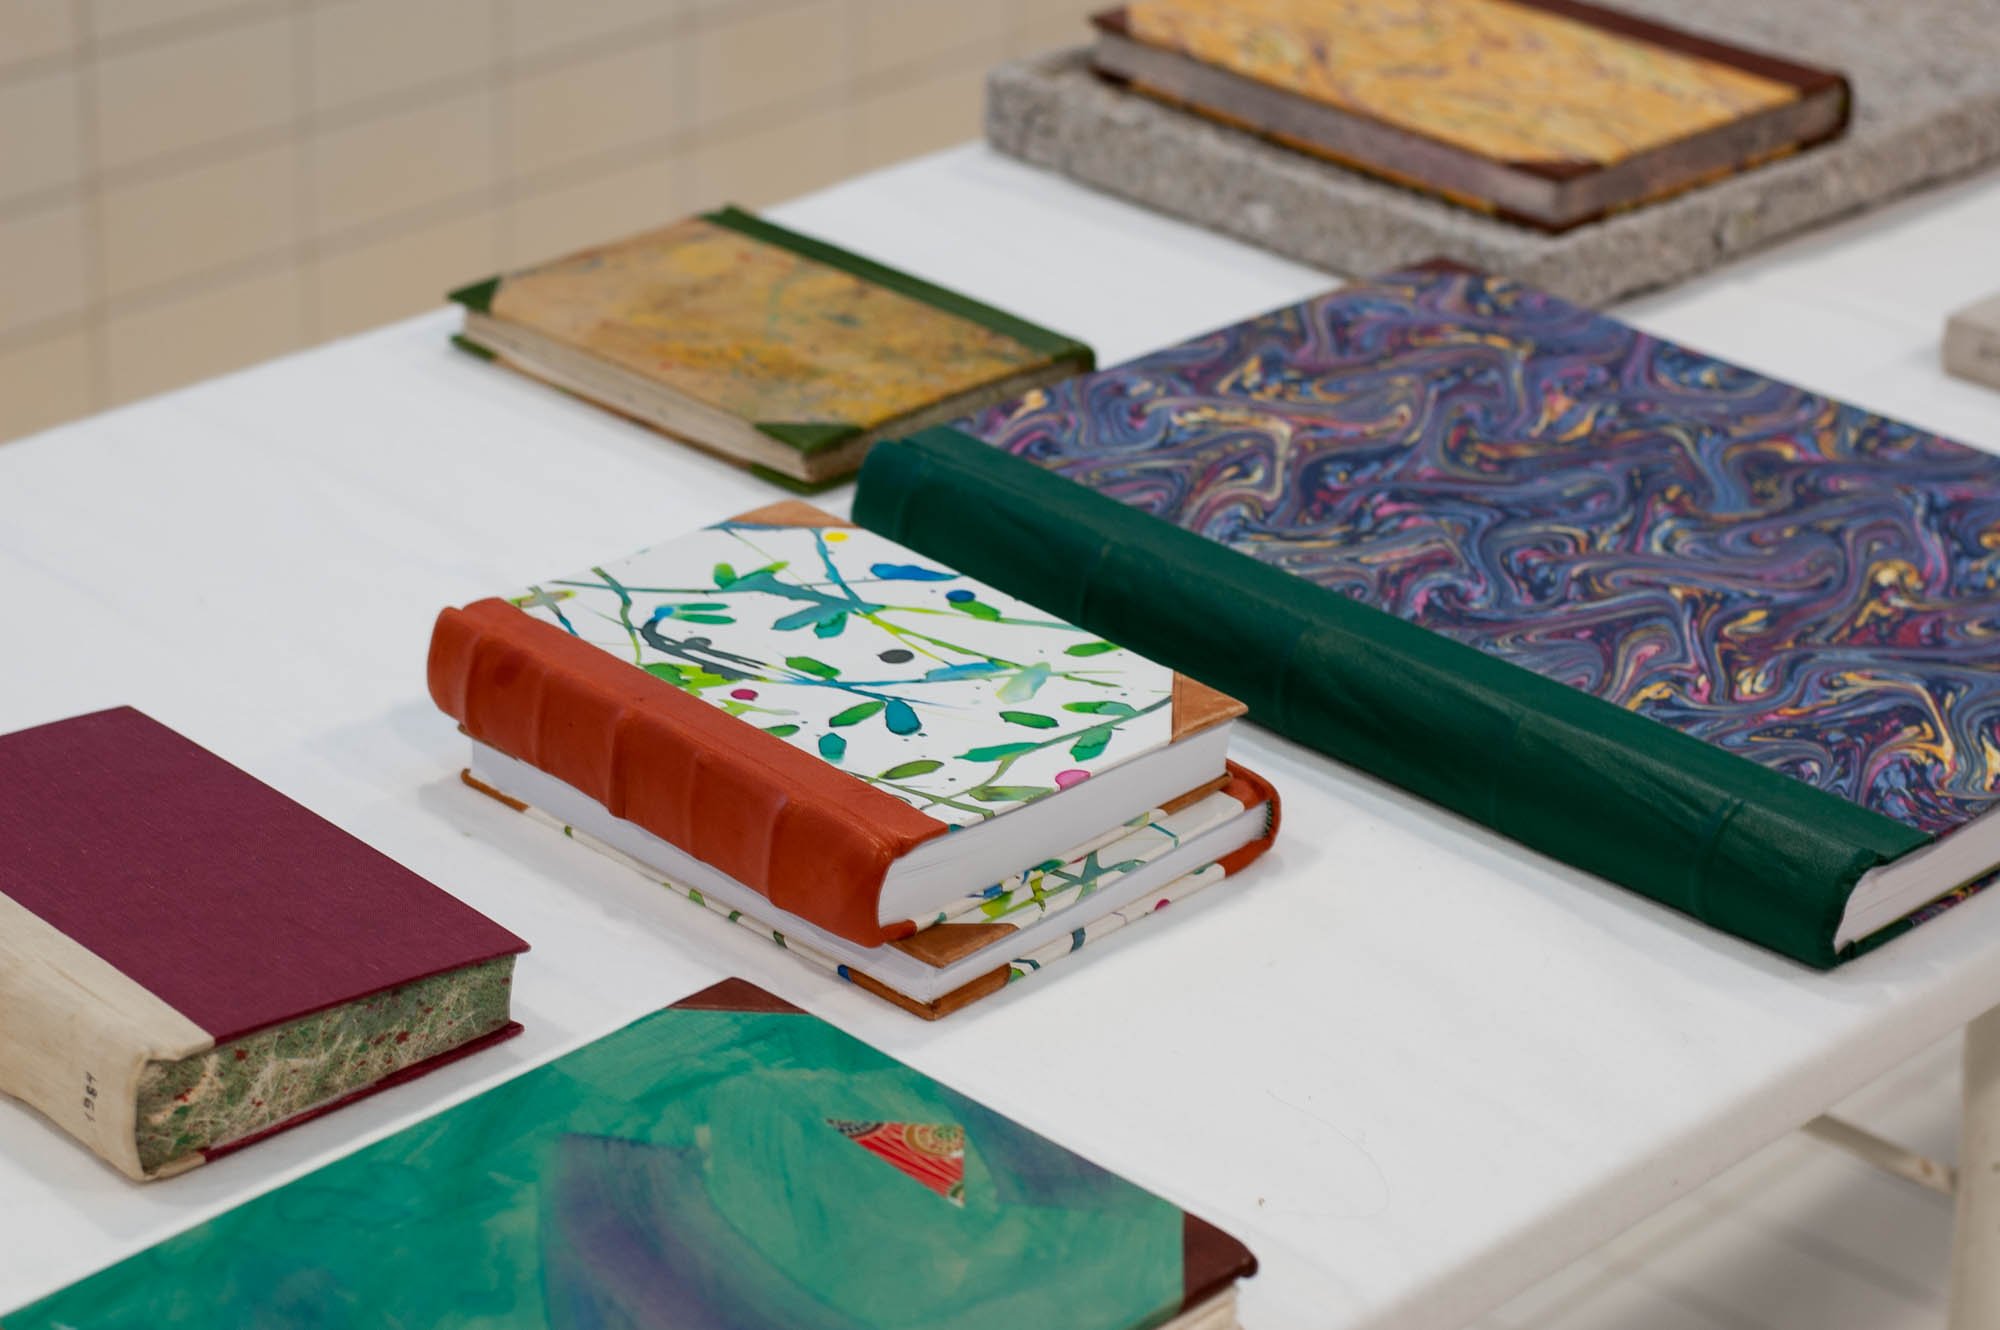  Some of the artist’s book binding projects were exhibited at the Arctic Art Book Fair 2020 in Romsa / Tromsø. Photo: Hilde Sørstrøm. 